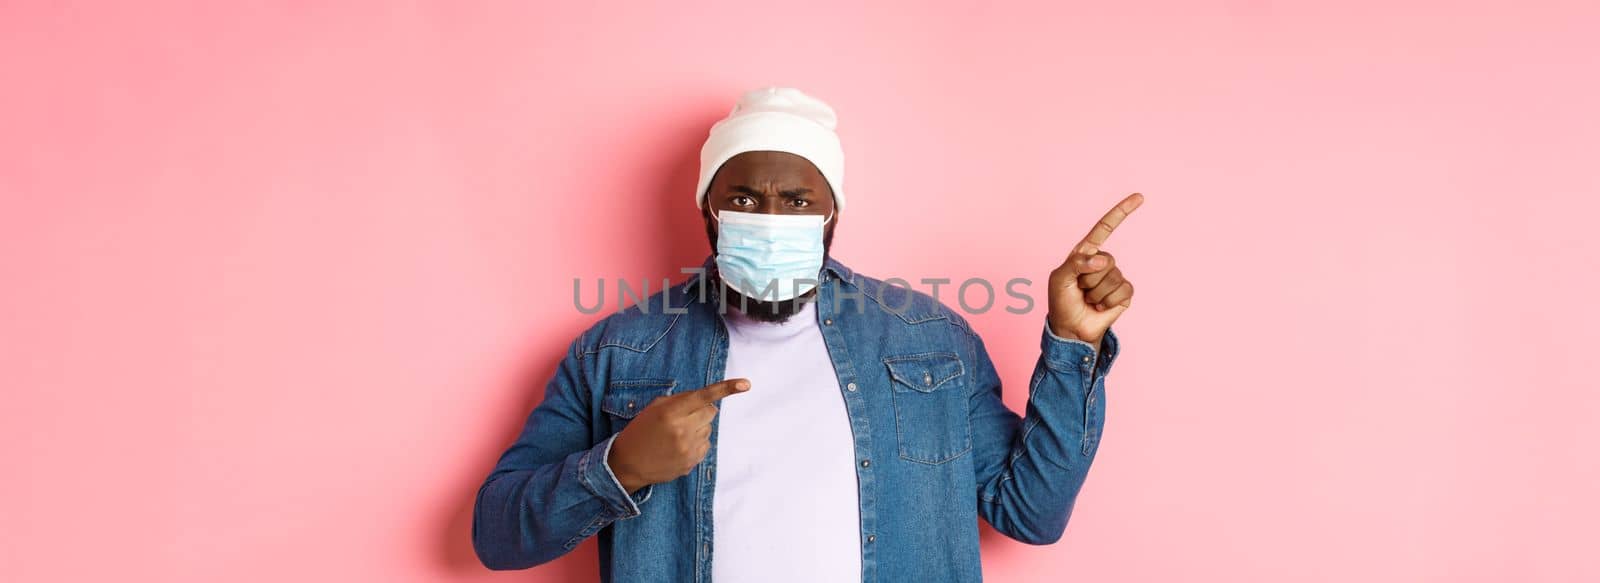 Coronavirus, lifestyle and global pandemic concept. Angry and disappointed african-american man in face mask pointing left, staring at camera displeased, pink background.